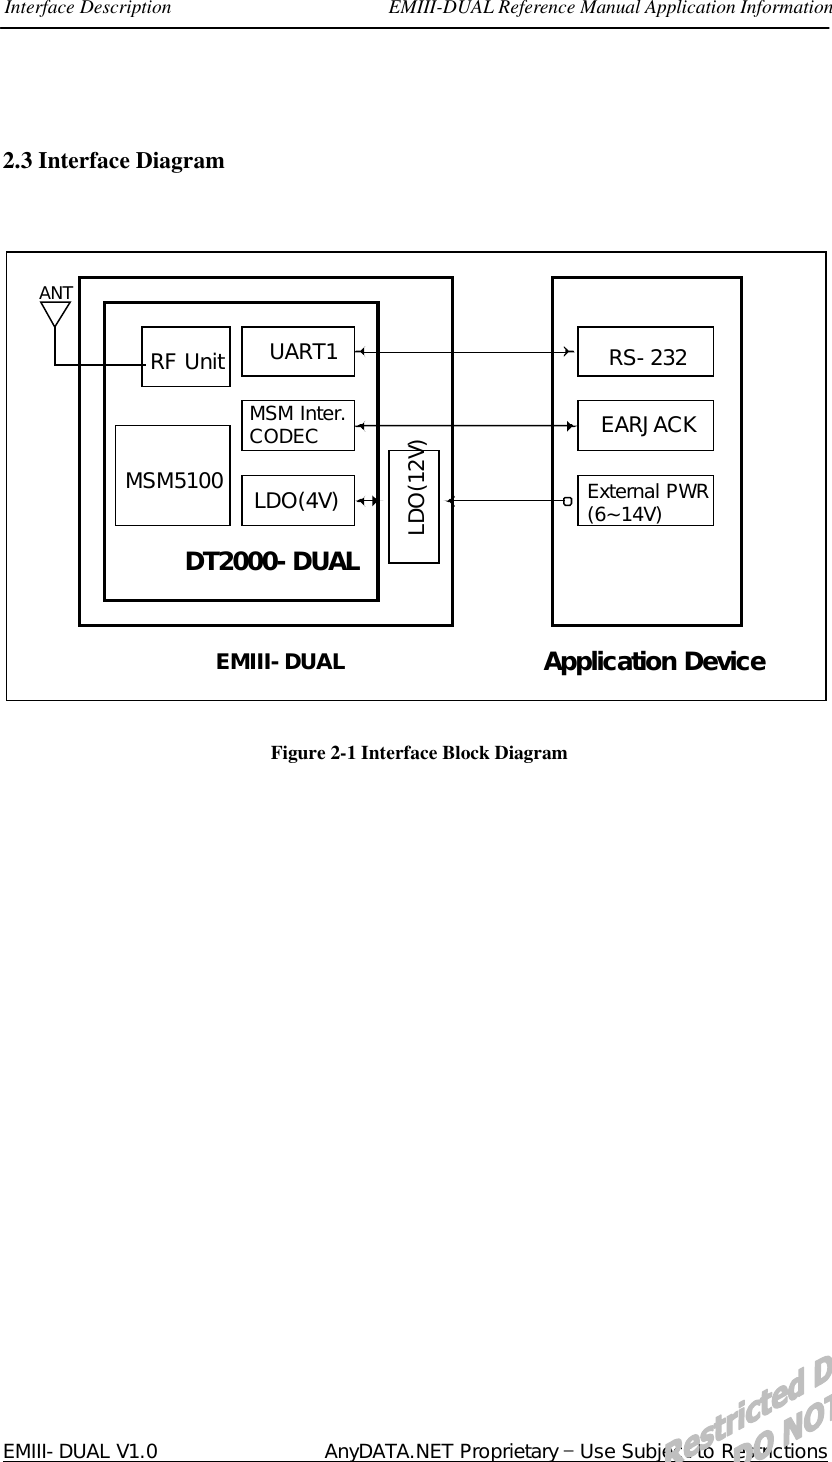 Interface Description                      EMIII-DUAL Reference Manual Application Information  EMIII-DUAL V1.0                 AnyDATA.NET Proprietary – Use Subject to Restrictions  2.3 Interface Diagram    RF Unit MSM5100 UART1 MSM Inter. CODEC LDO(12V) RS-232 EARJACK ANT DT2000-DUAL Application Device EMIII-DUAL LDO(4V) External PWR (6~14V)   Figure 2-1 Interface Block Diagram  